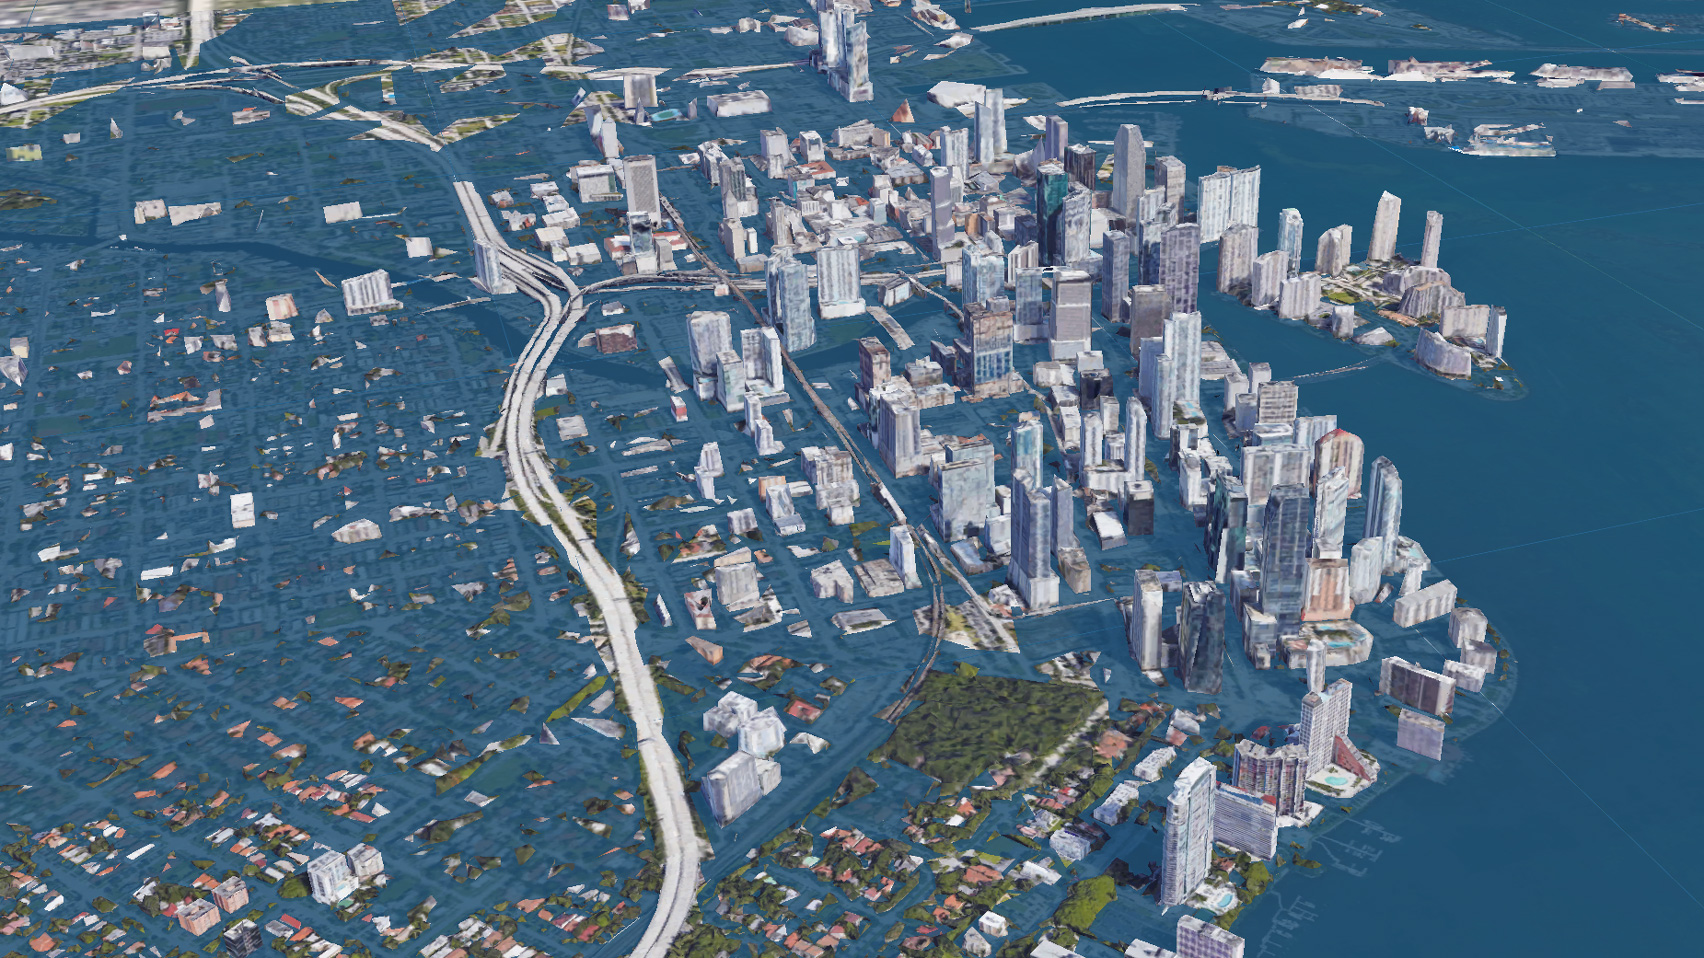 Surging Seas software shows potential impact of rising sea levels on US cities